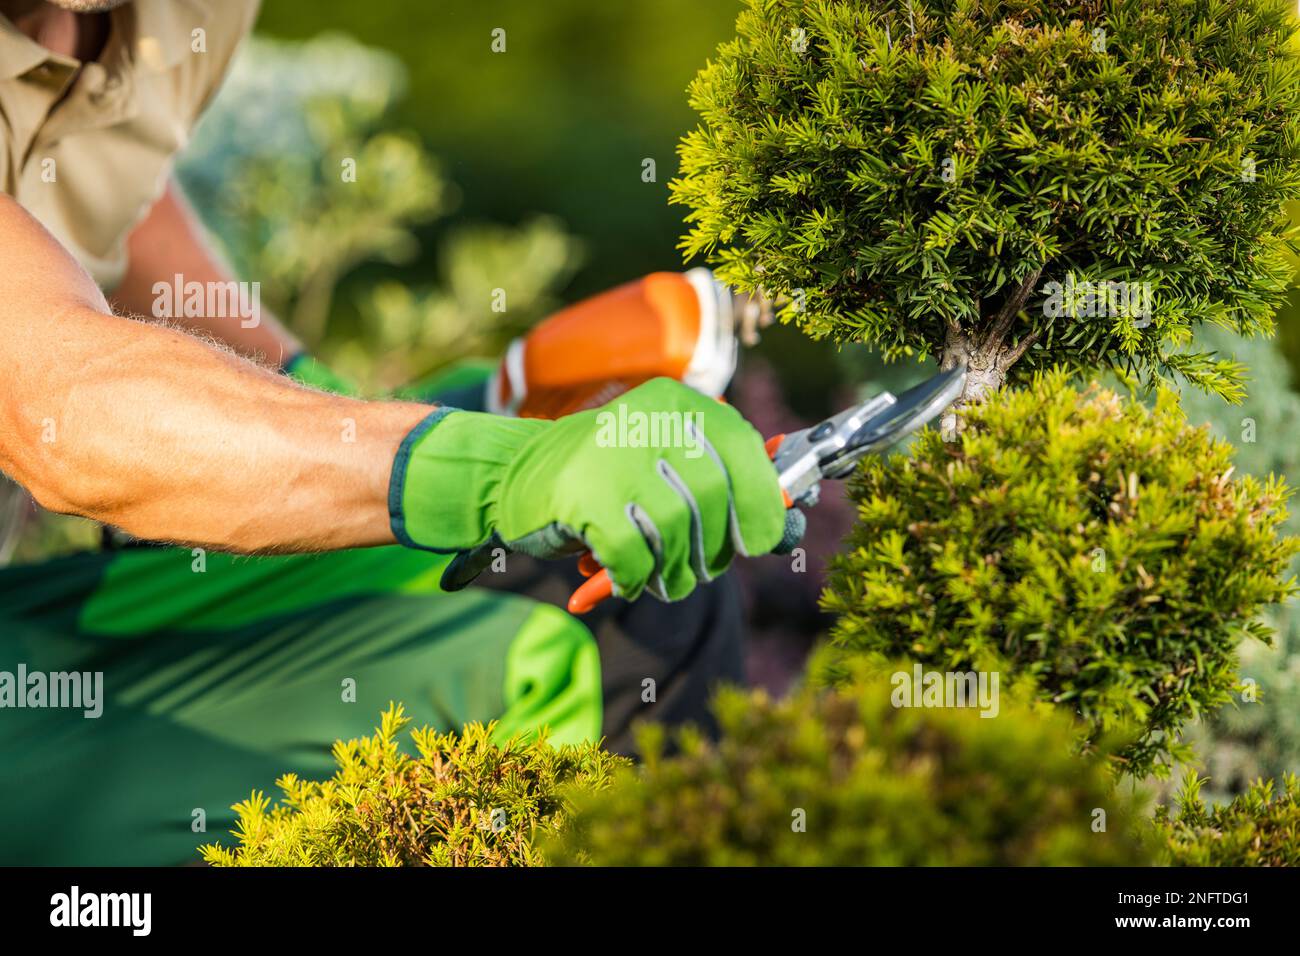 Closeup of Professional Gardener's Hand with Pruning Shears Trimming the Decorative Tree. Garden Landscape Maintenance. Stock Photo